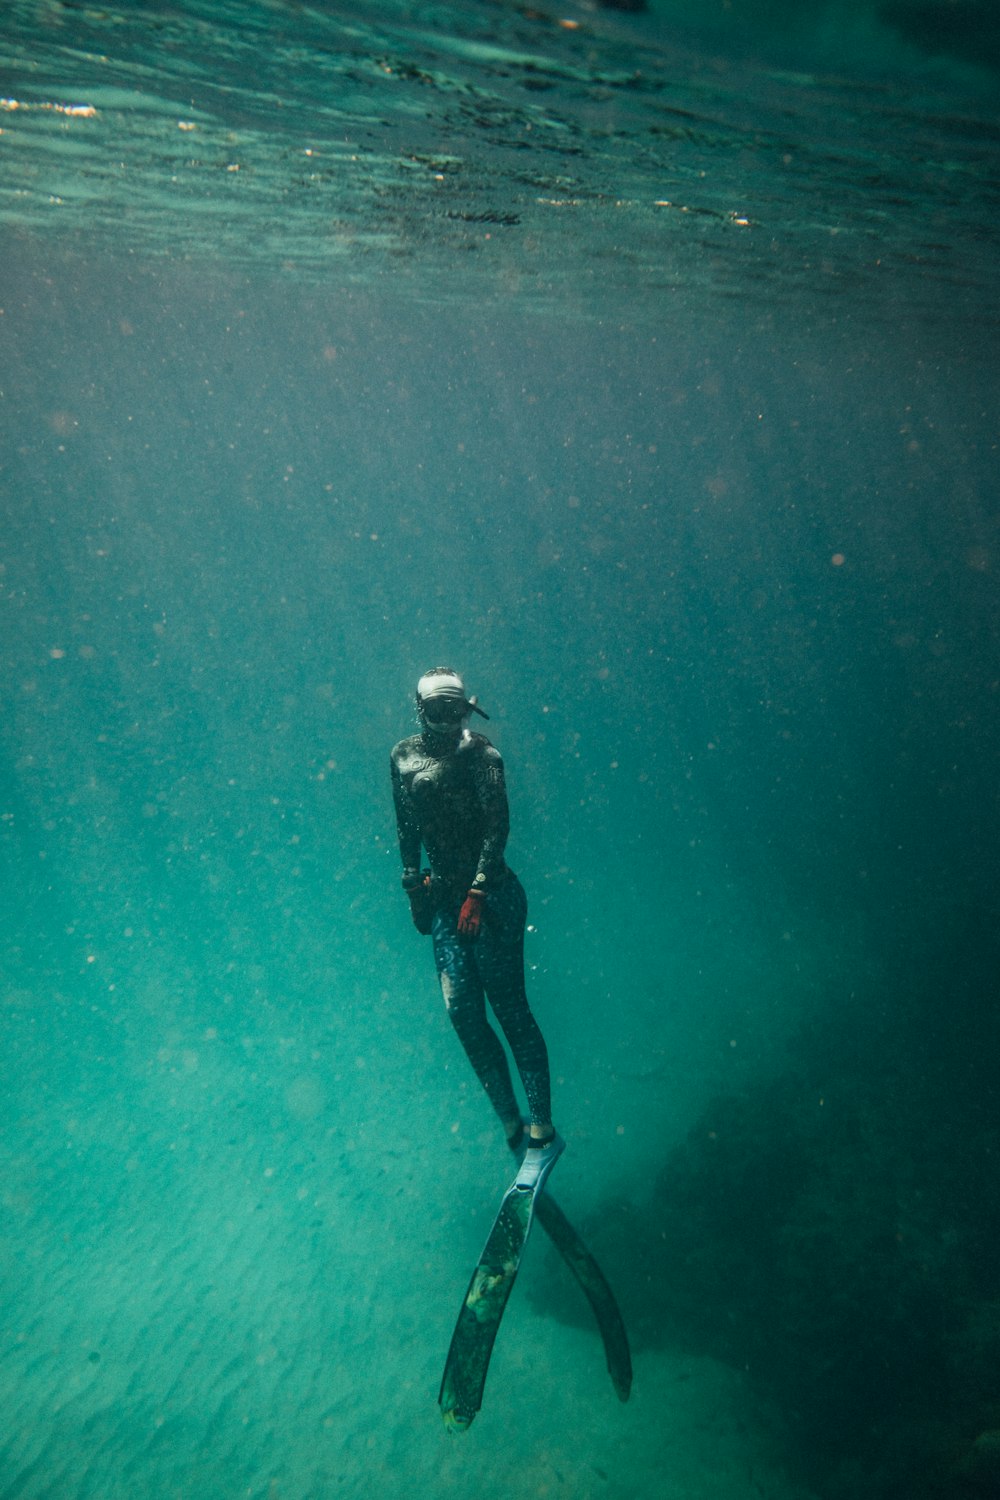 a person in a wet suit is in the water